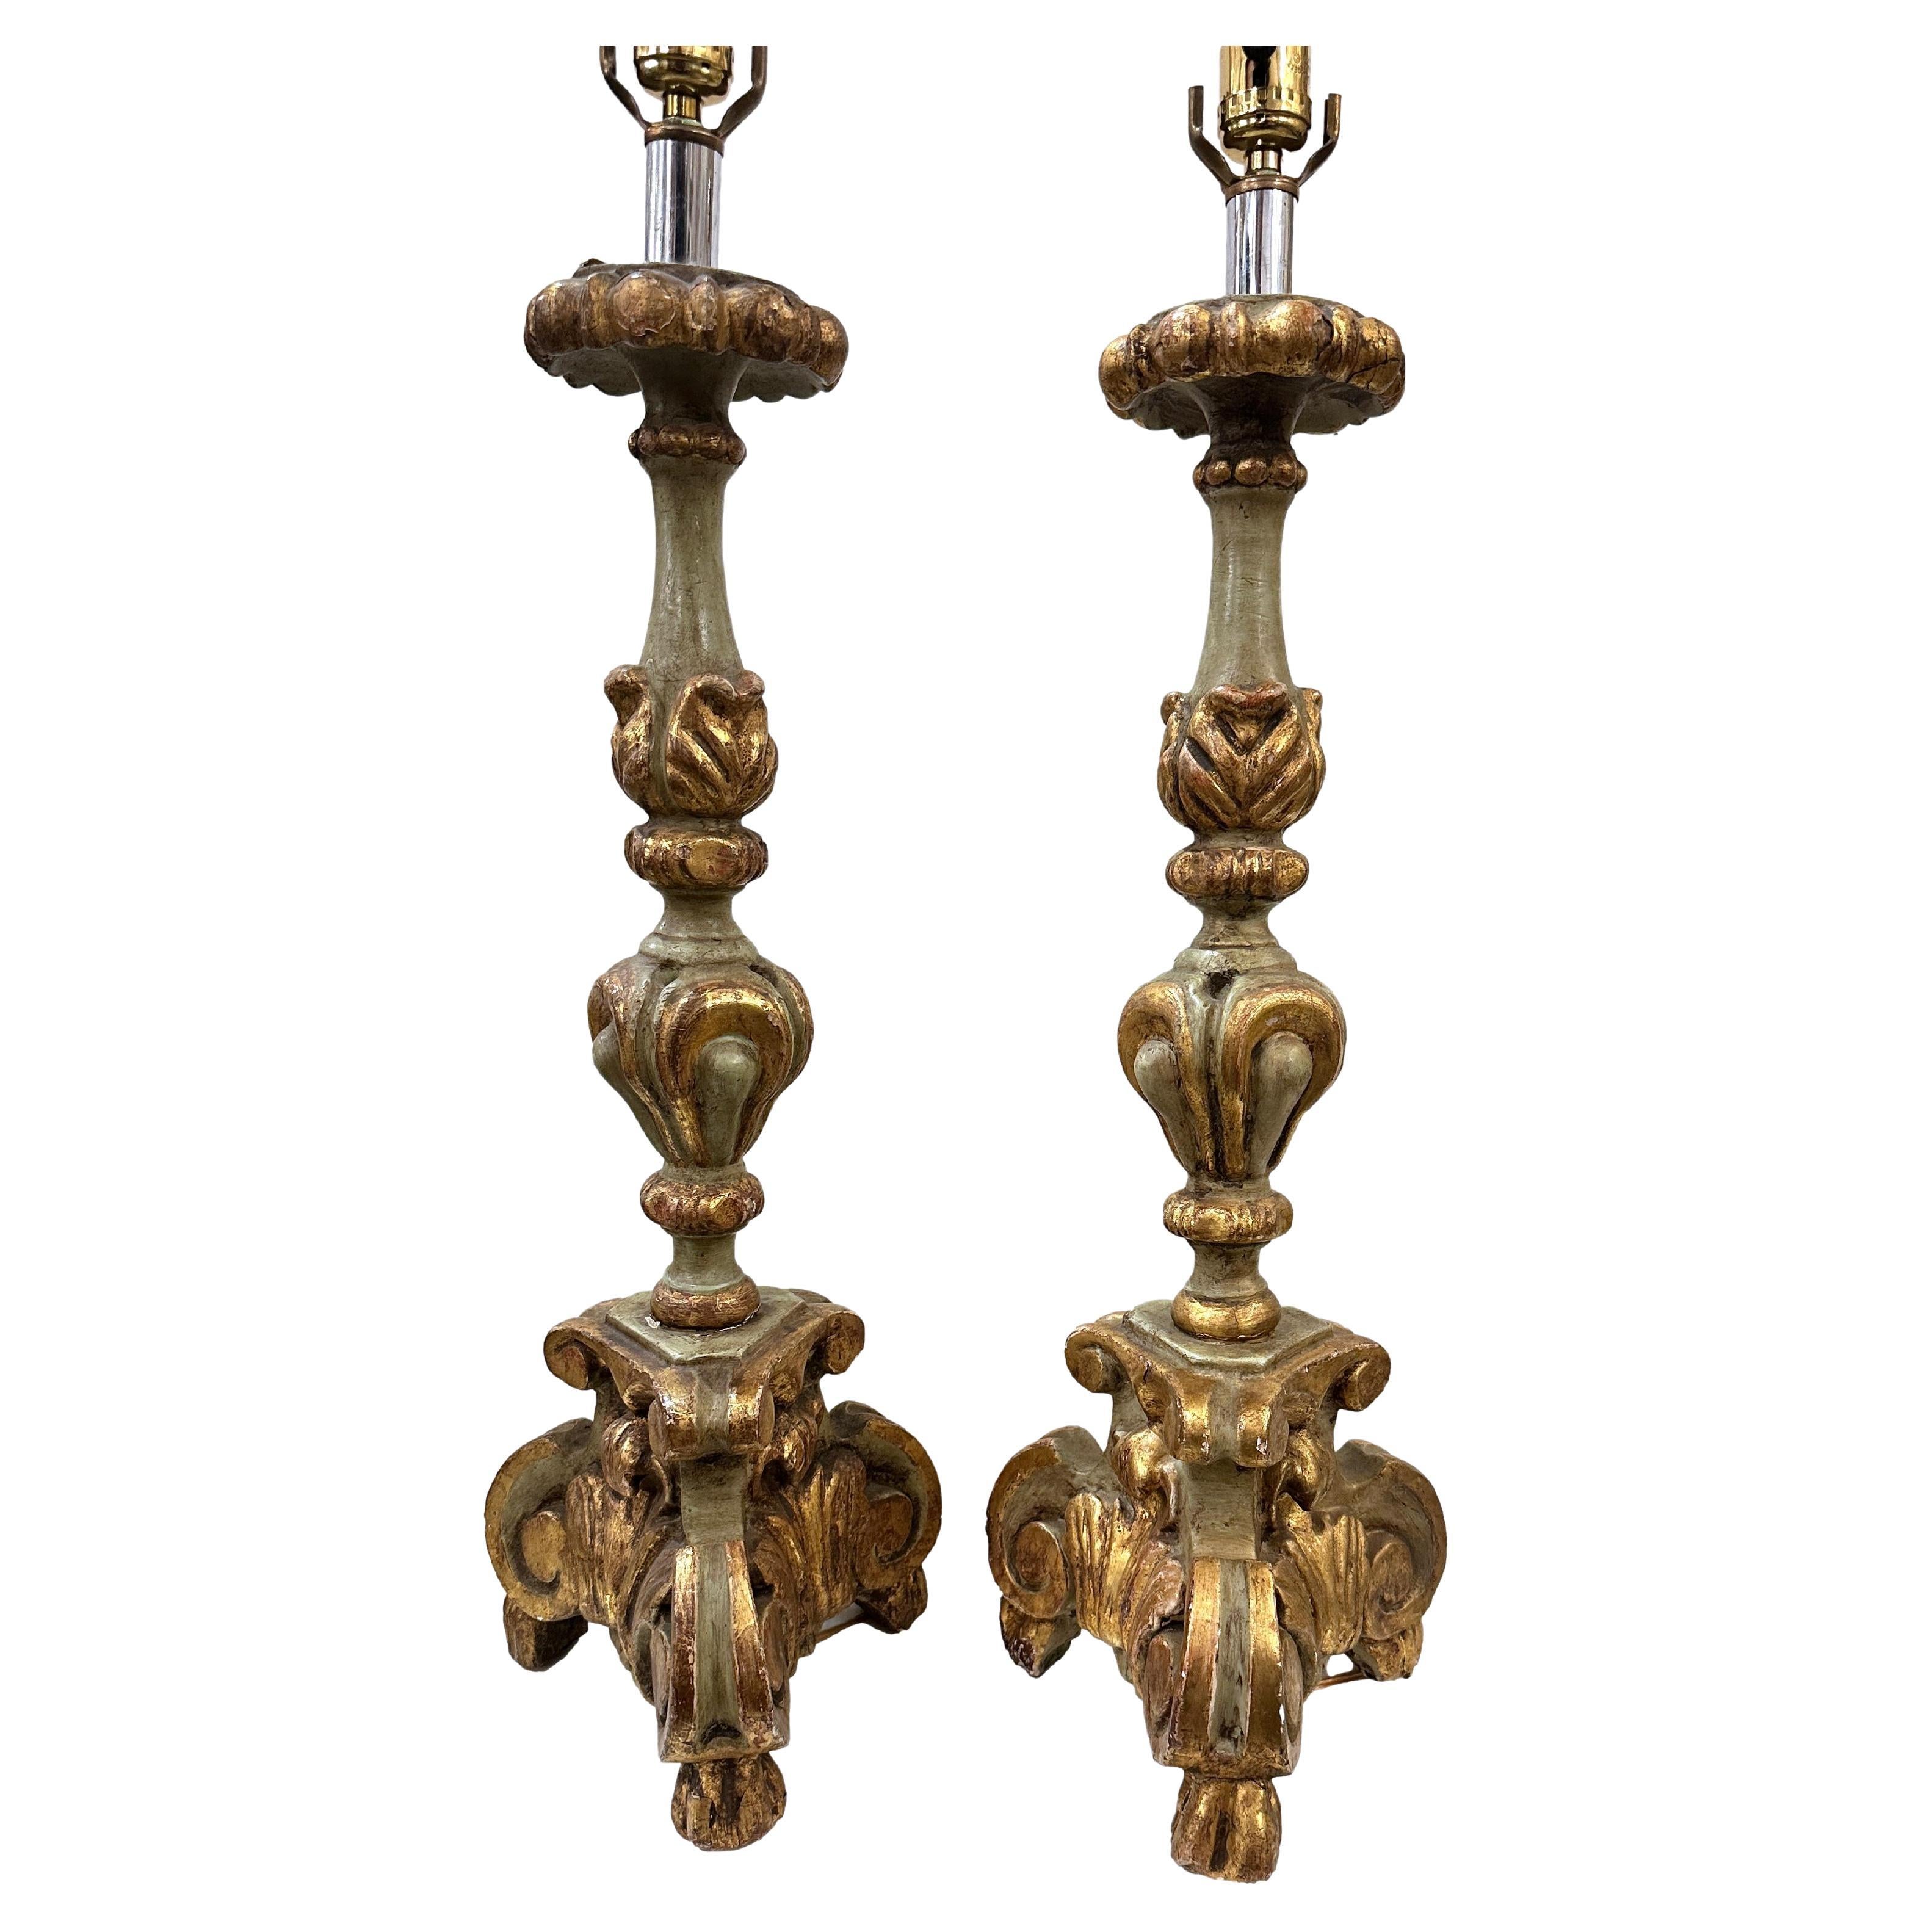 Pair of Antique Italian Candlestick Lamps For Sale